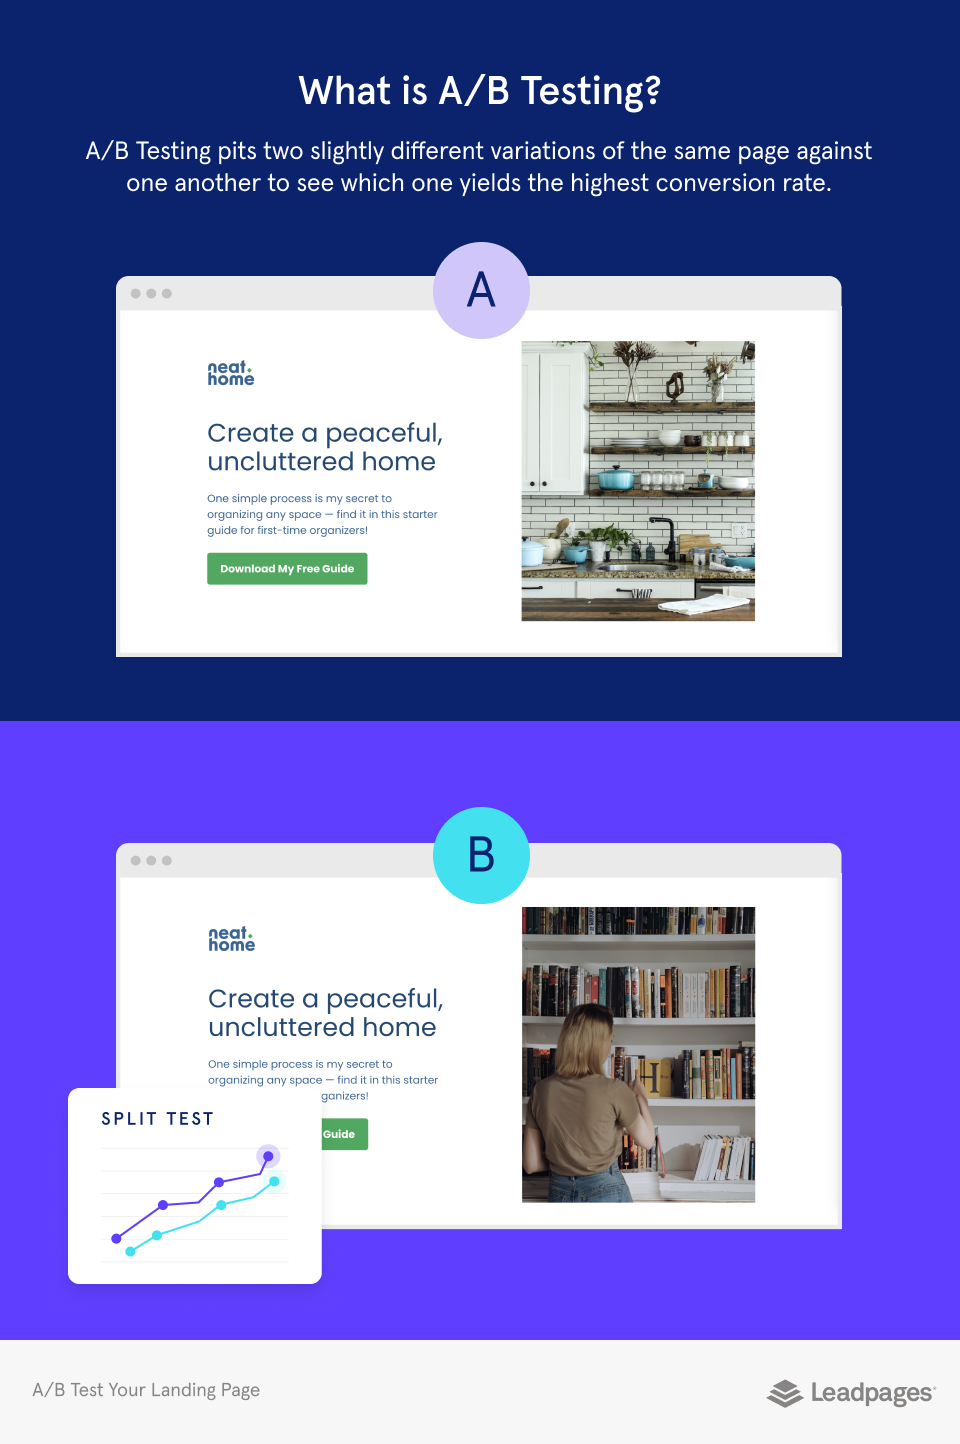 What is landing page A/B testing?